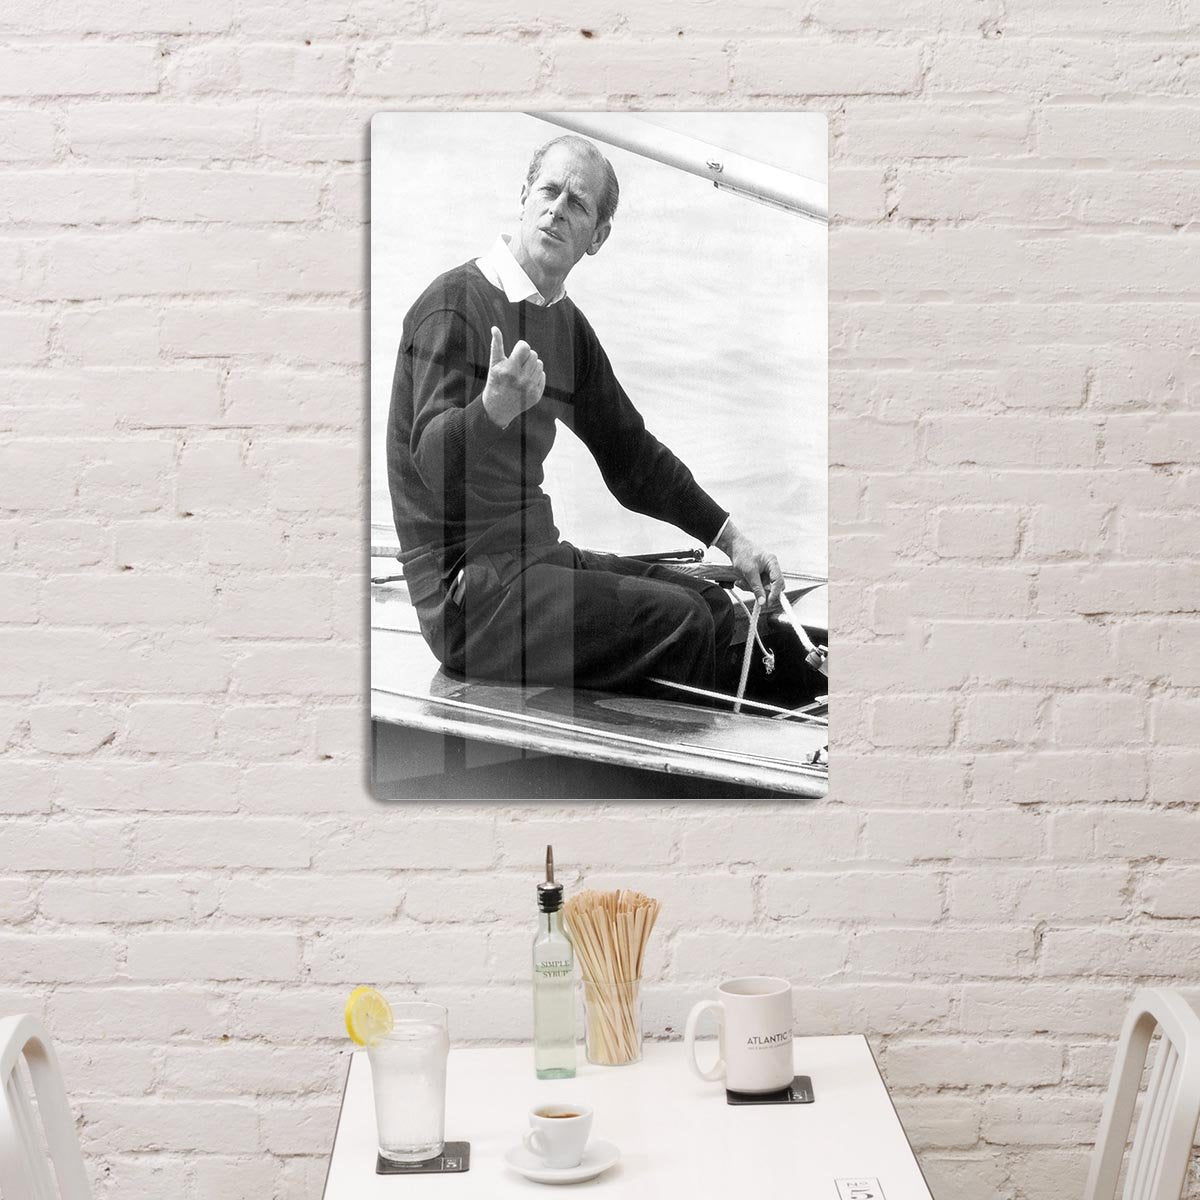 Prince Philip resting after racing at Cowes Isle of Wight HD Metal Print